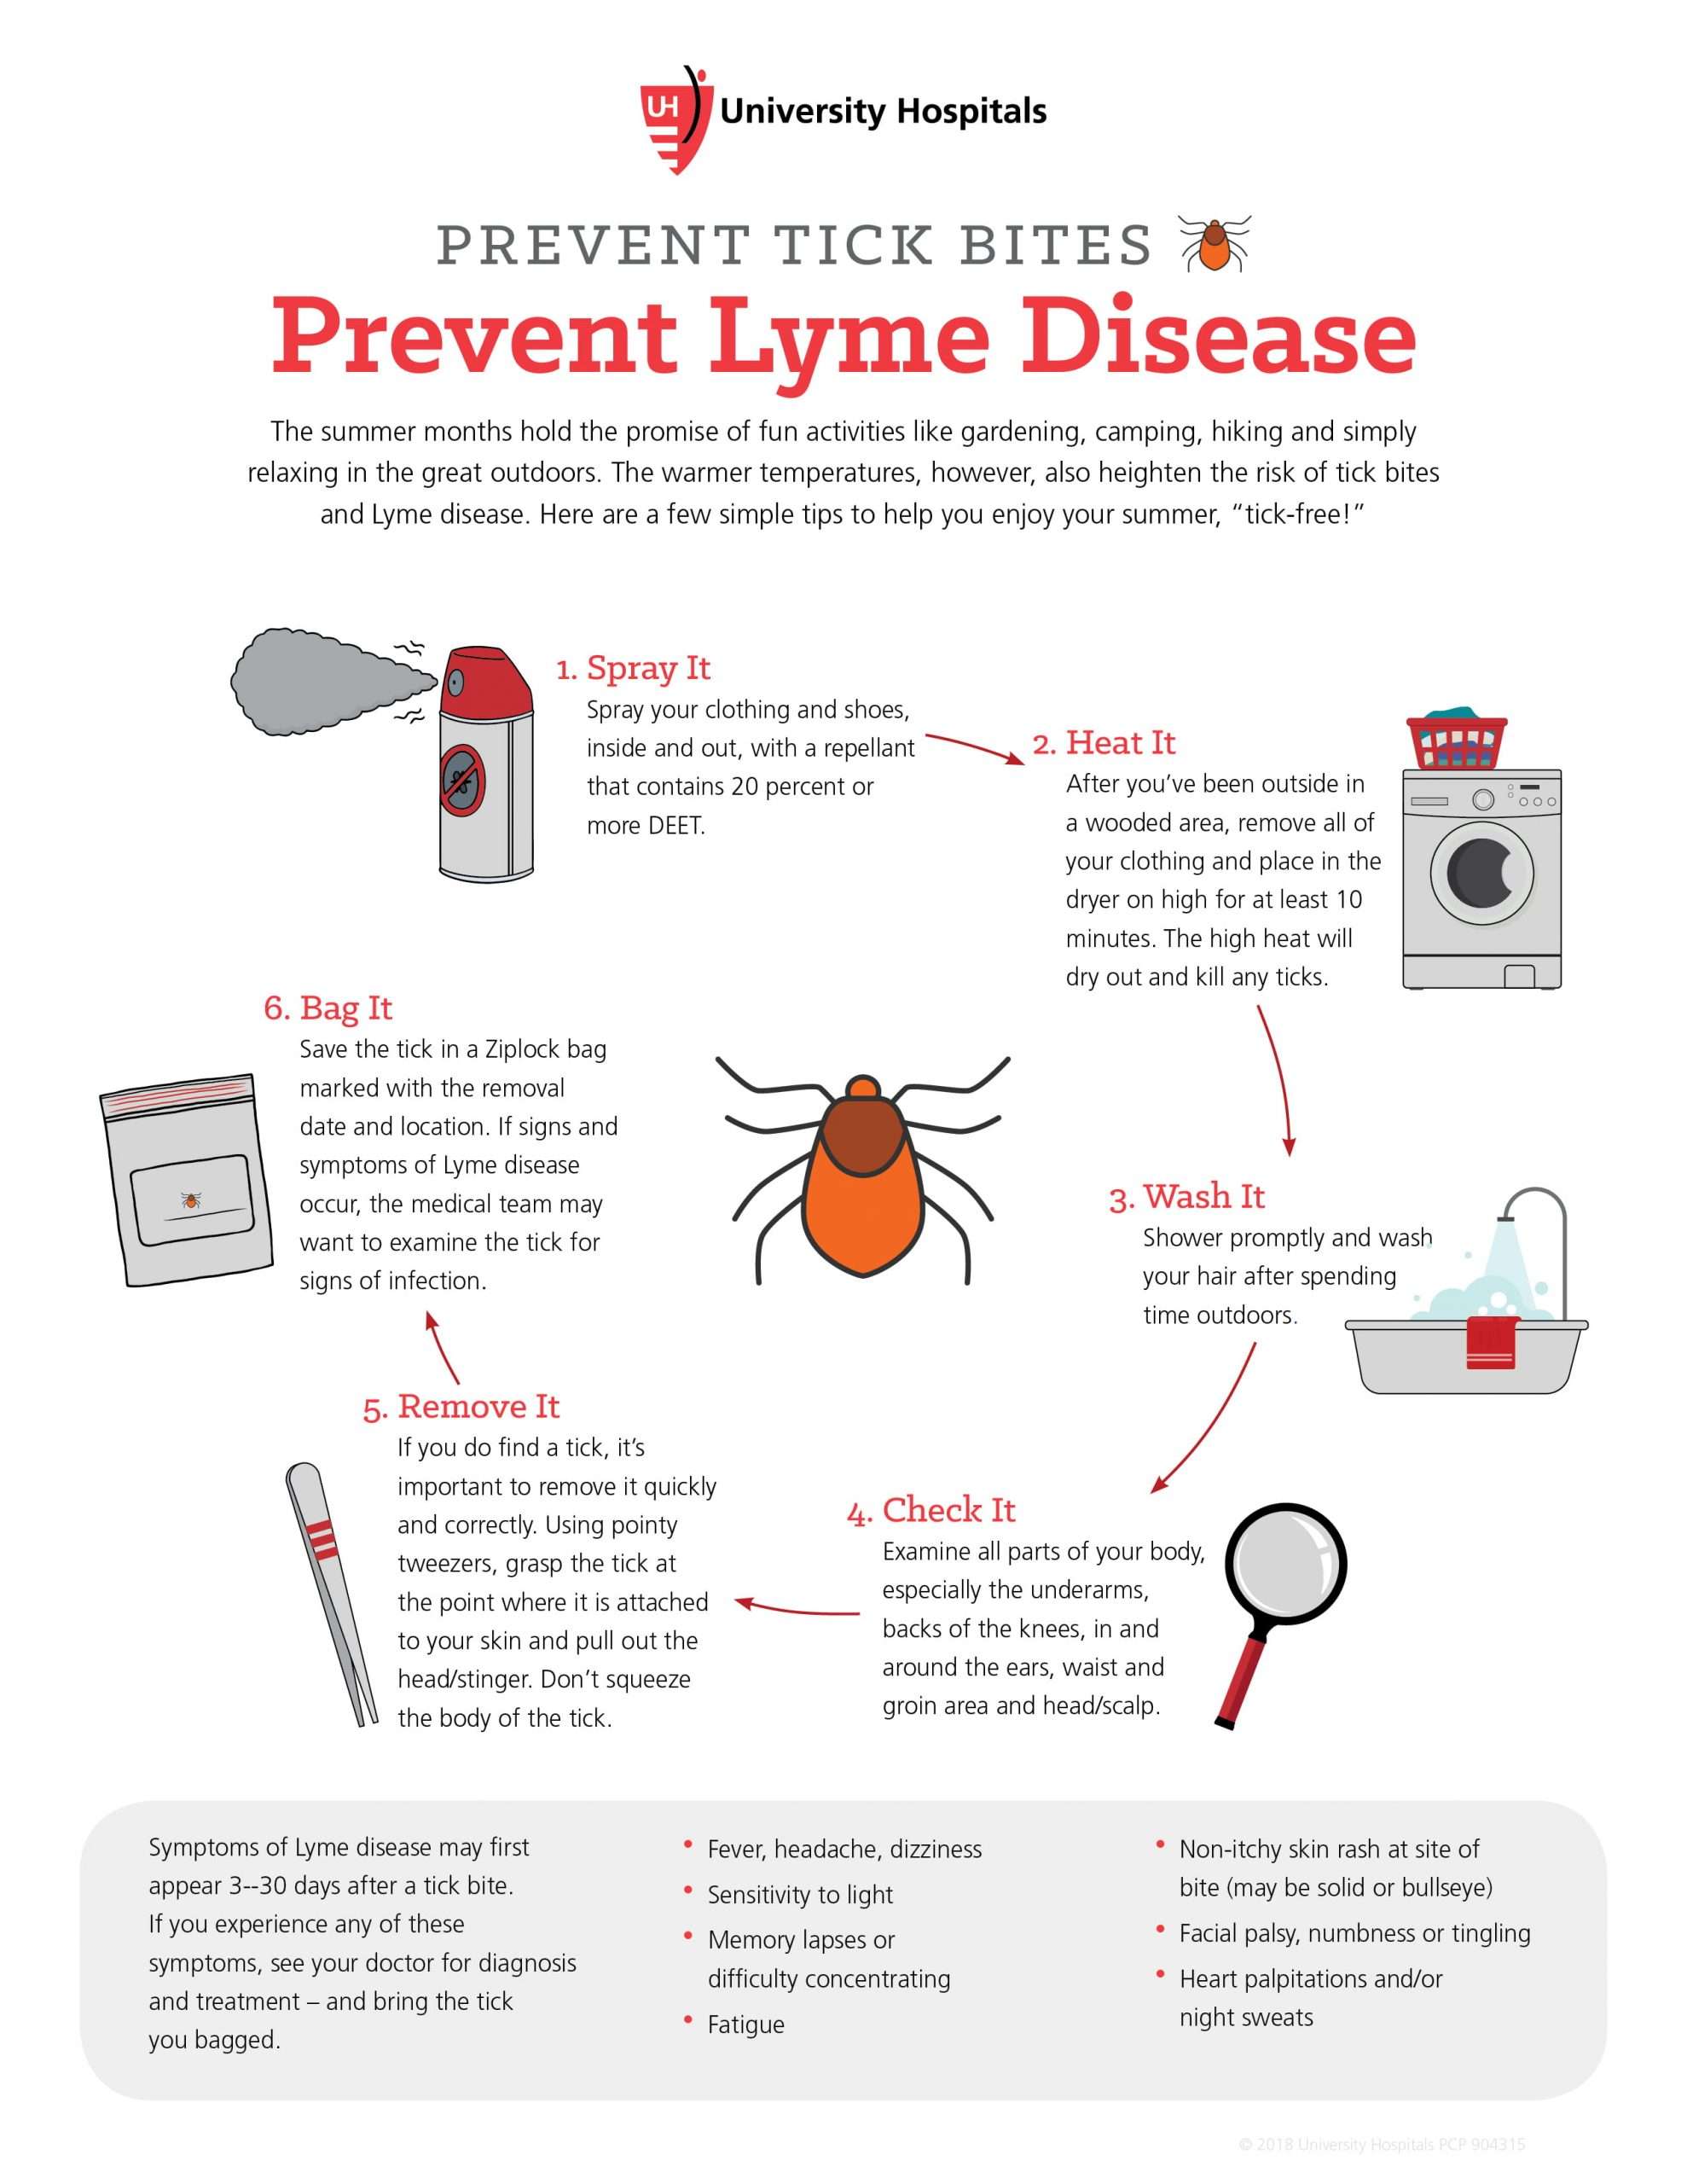 How Best to Prevent Tick Bites and Avoid Lyme Disease ...